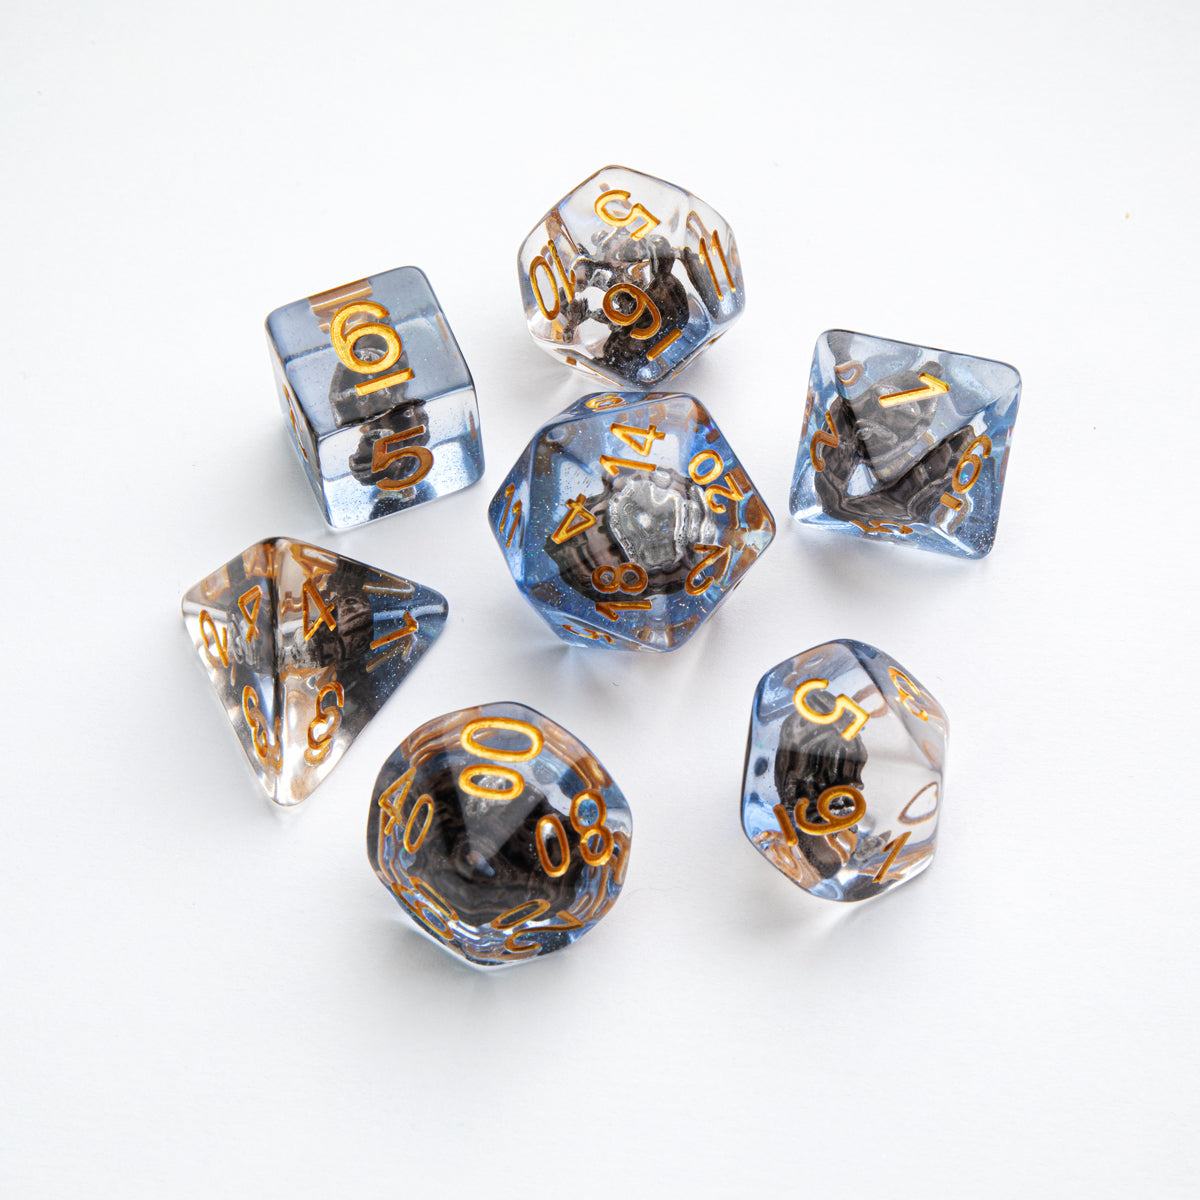 Cursed Ship - RPG Dice Set - Gamegenic Embraced Series